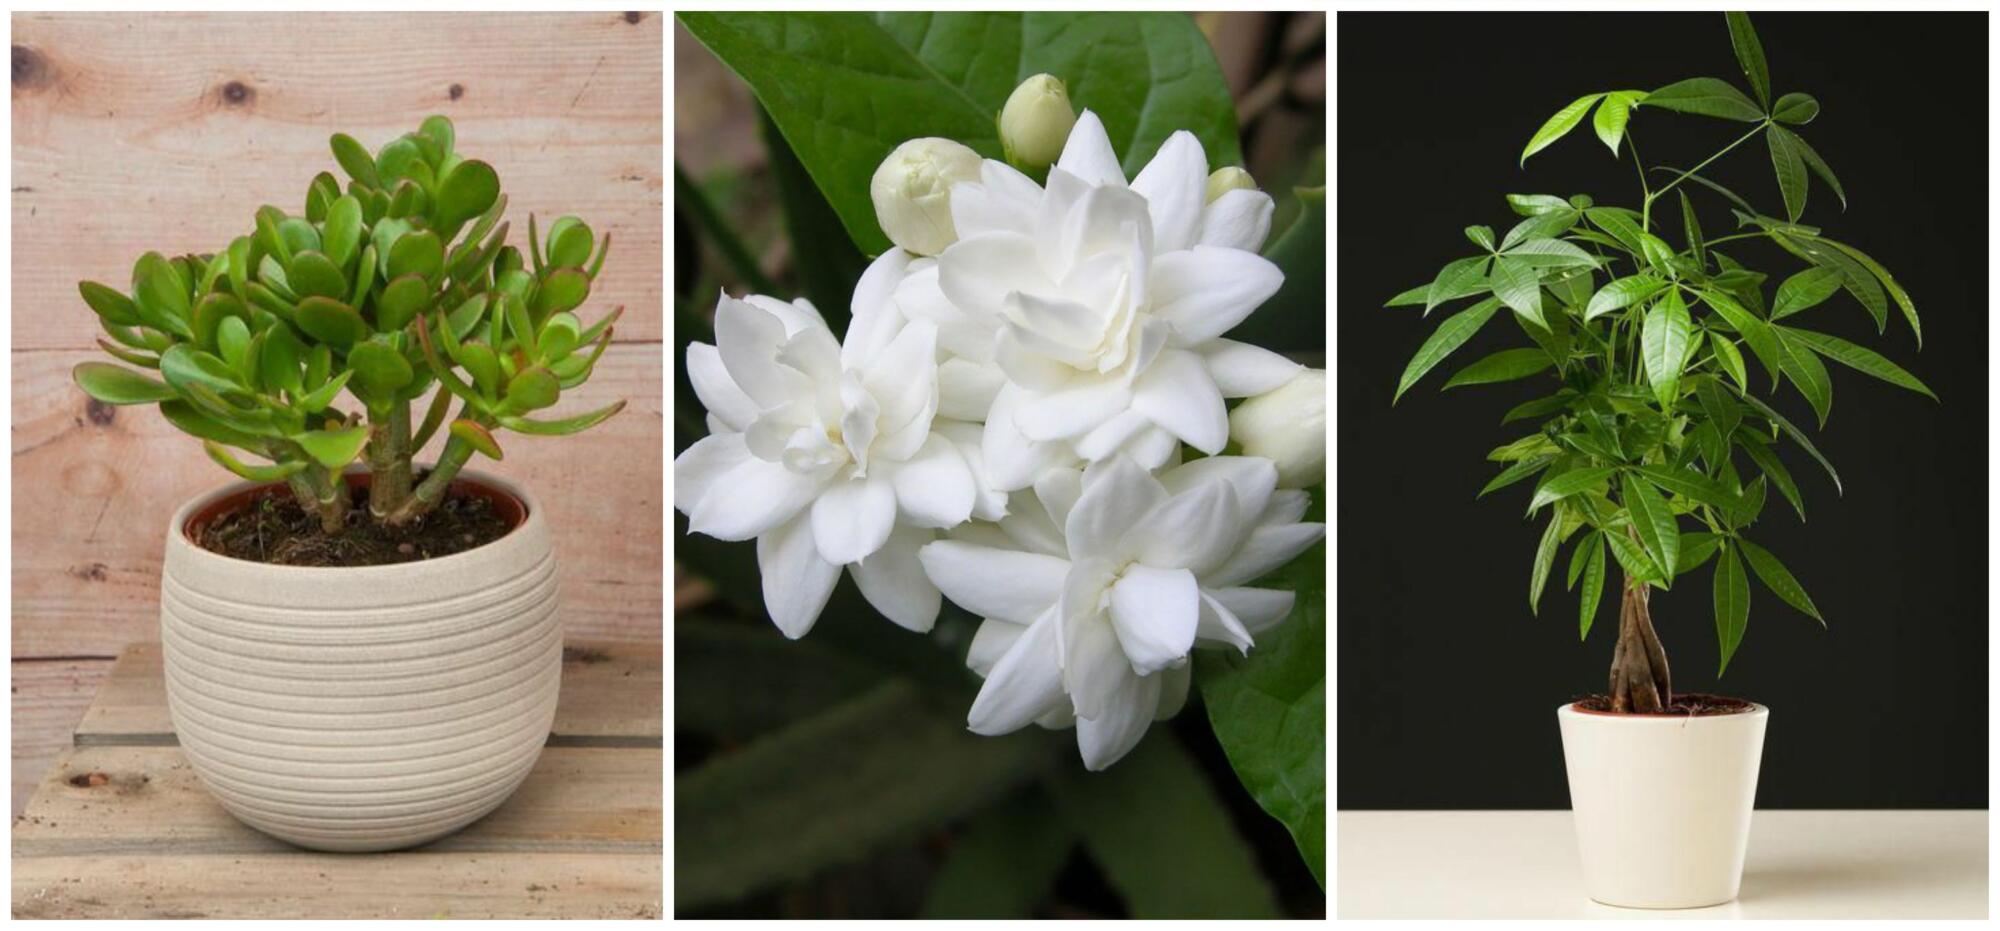 Four different potted plants with white flowers for good energy.